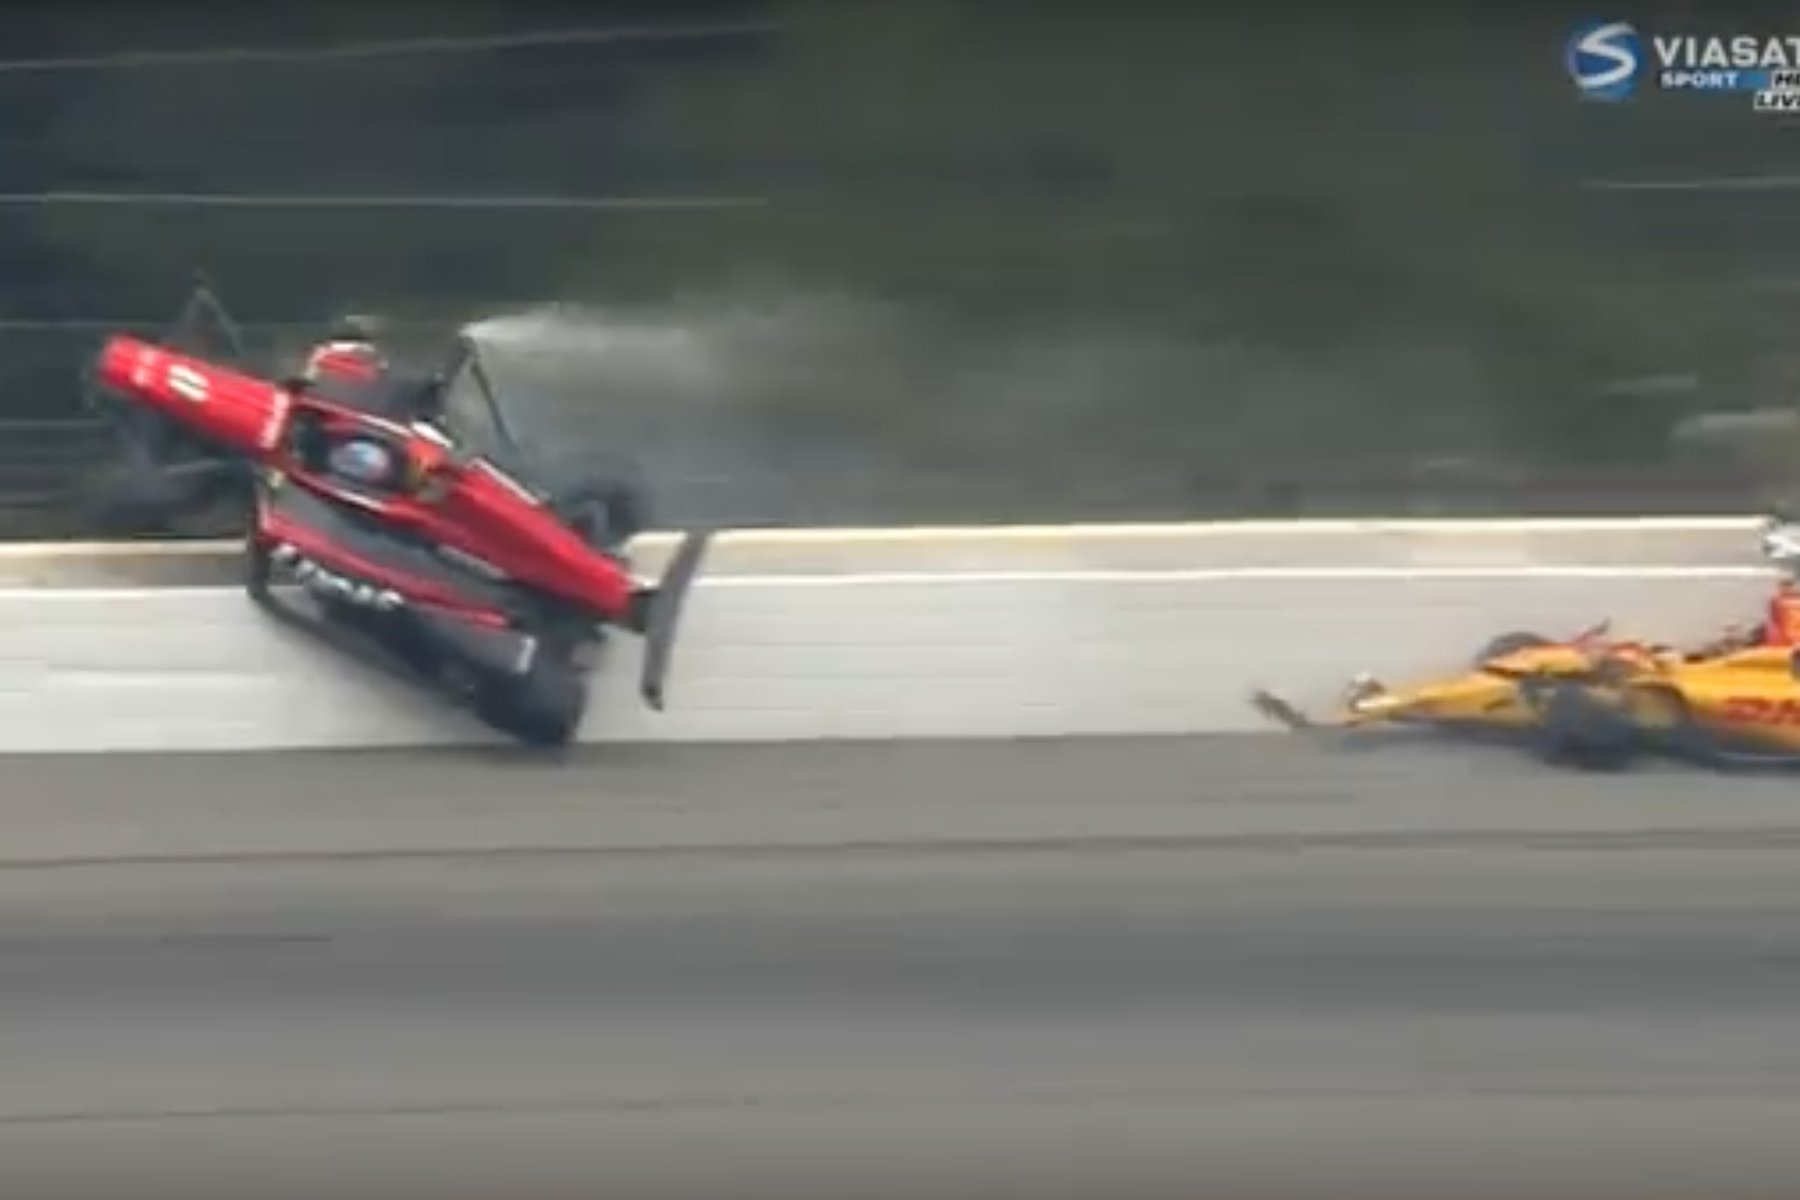 Last year's race was marred by Robert Wickens horrible crash that left him paralyzed from the waist down